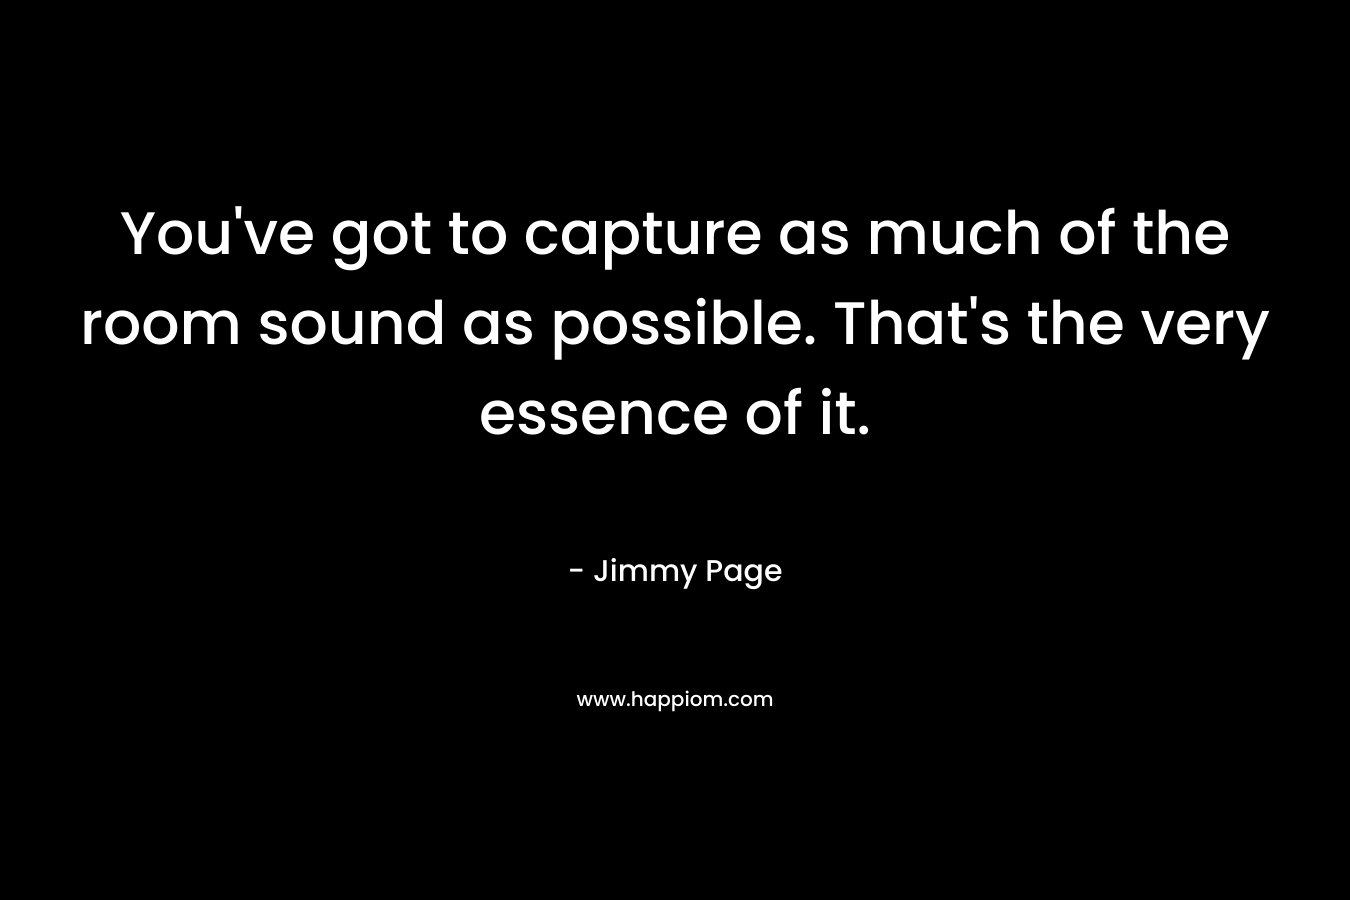 You've got to capture as much of the room sound as possible. That's the very essence of it.